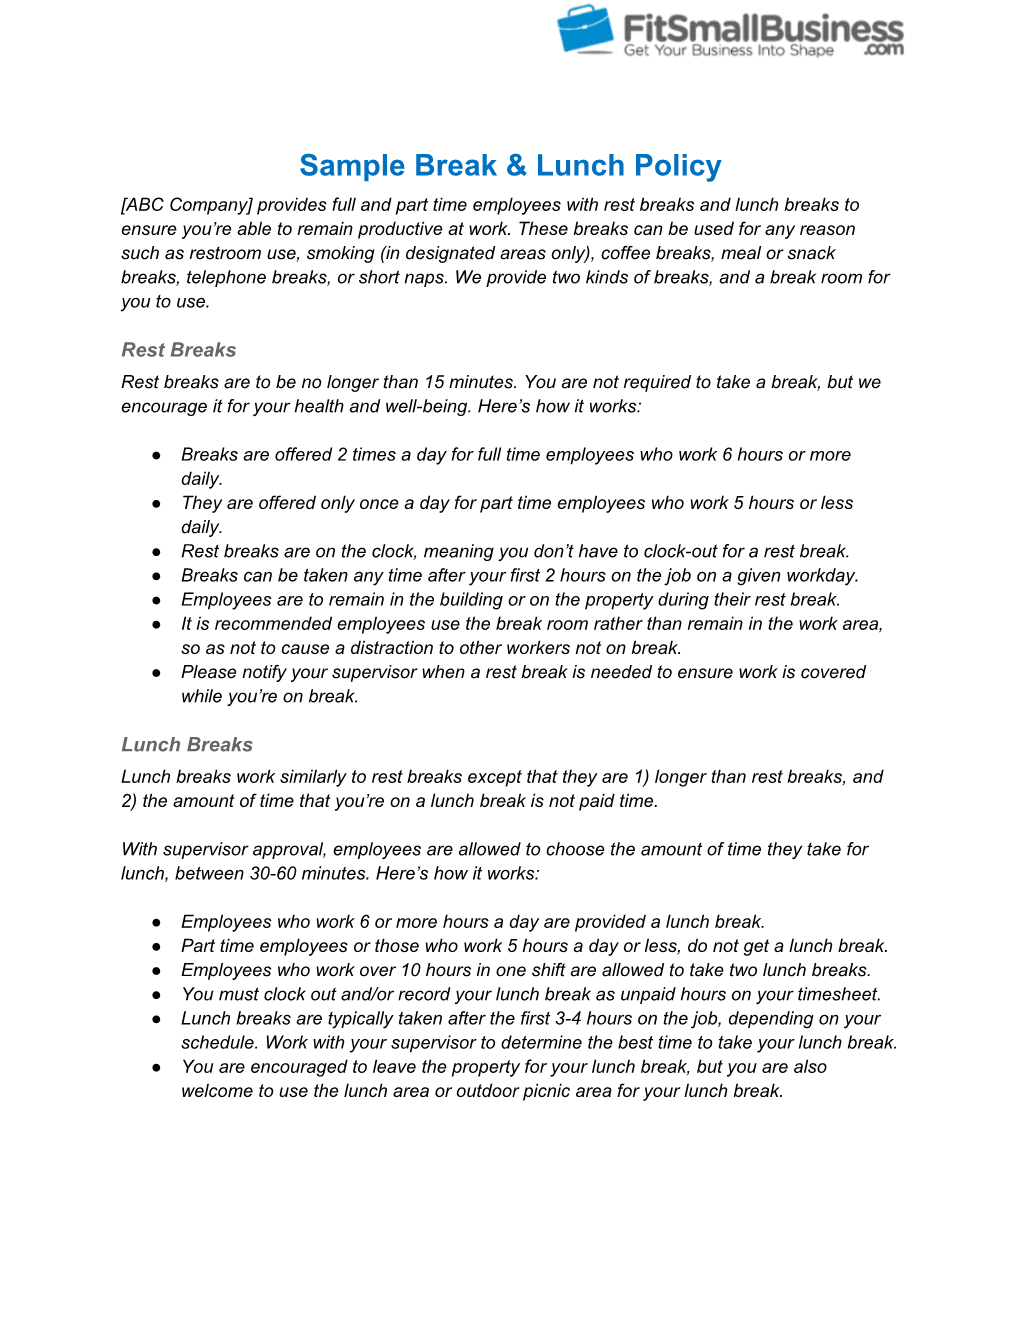 Sample Break & Lunch Policy